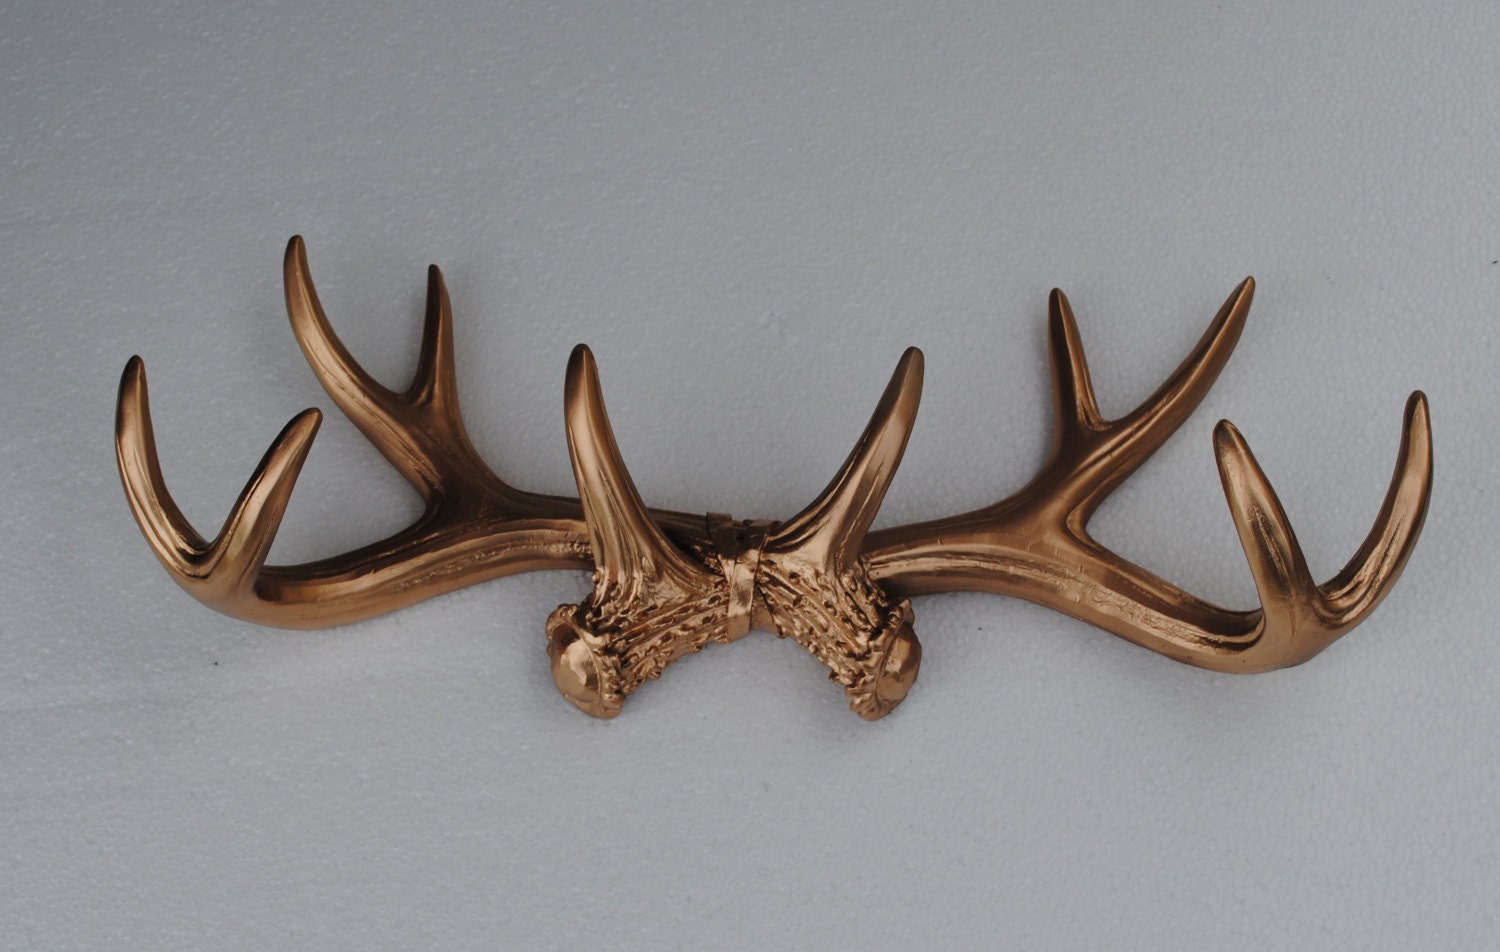 Gold -Deer Antlers-Faux Antlers-Large Wall Antlers- Wall Rack-Faux Taxidermy-Wall Decor-Man Cave - FromShab2Chic